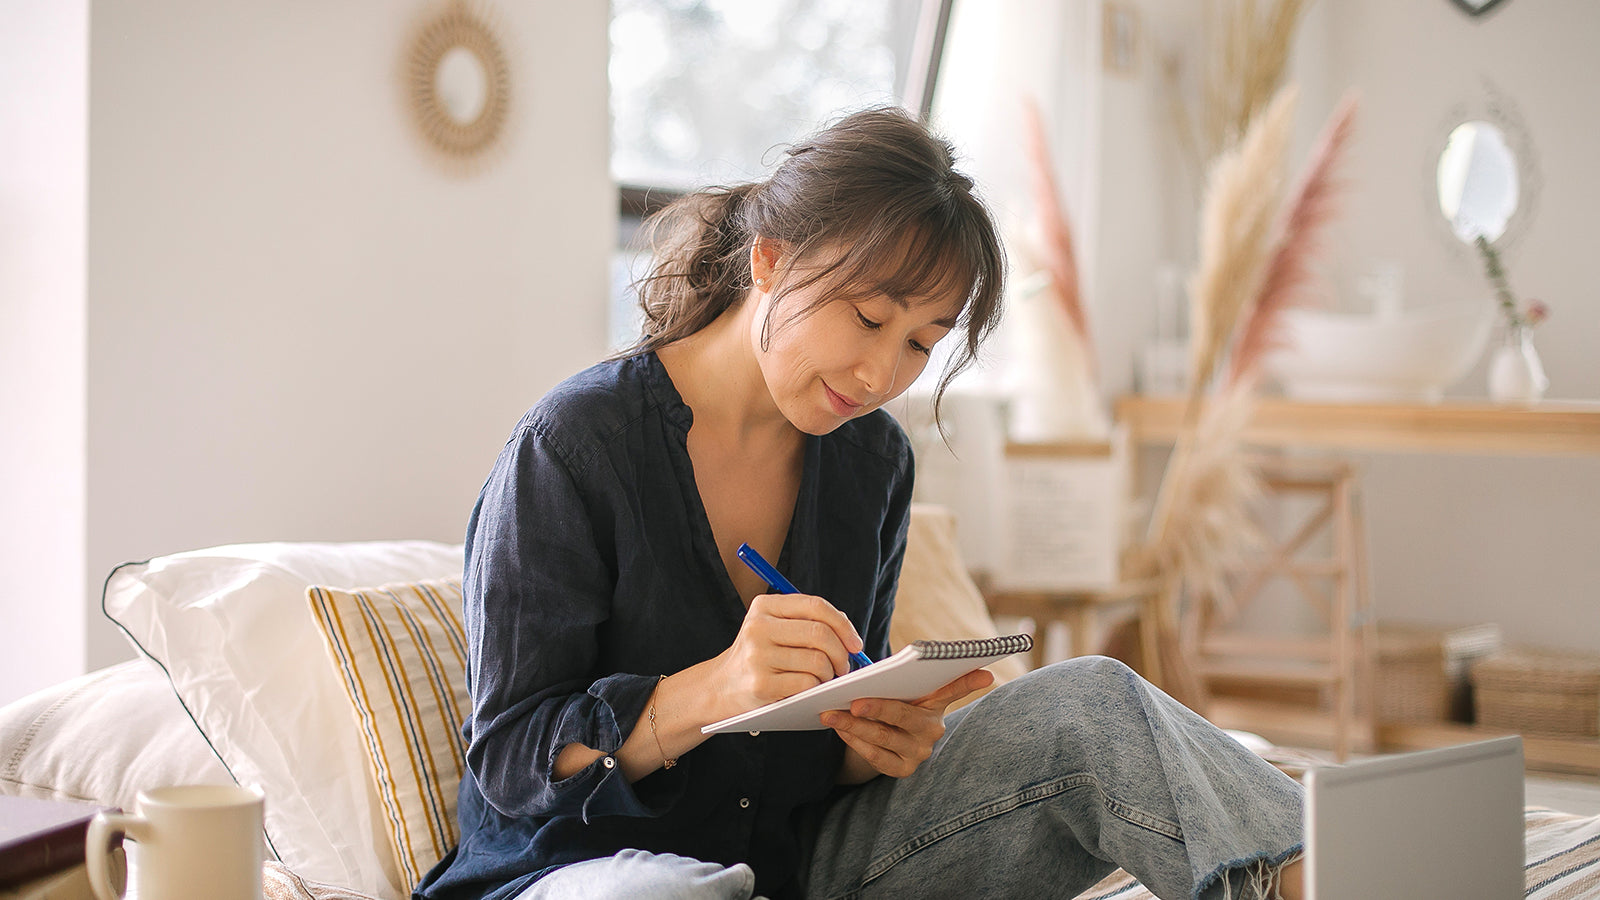 A woman writing on a notepad